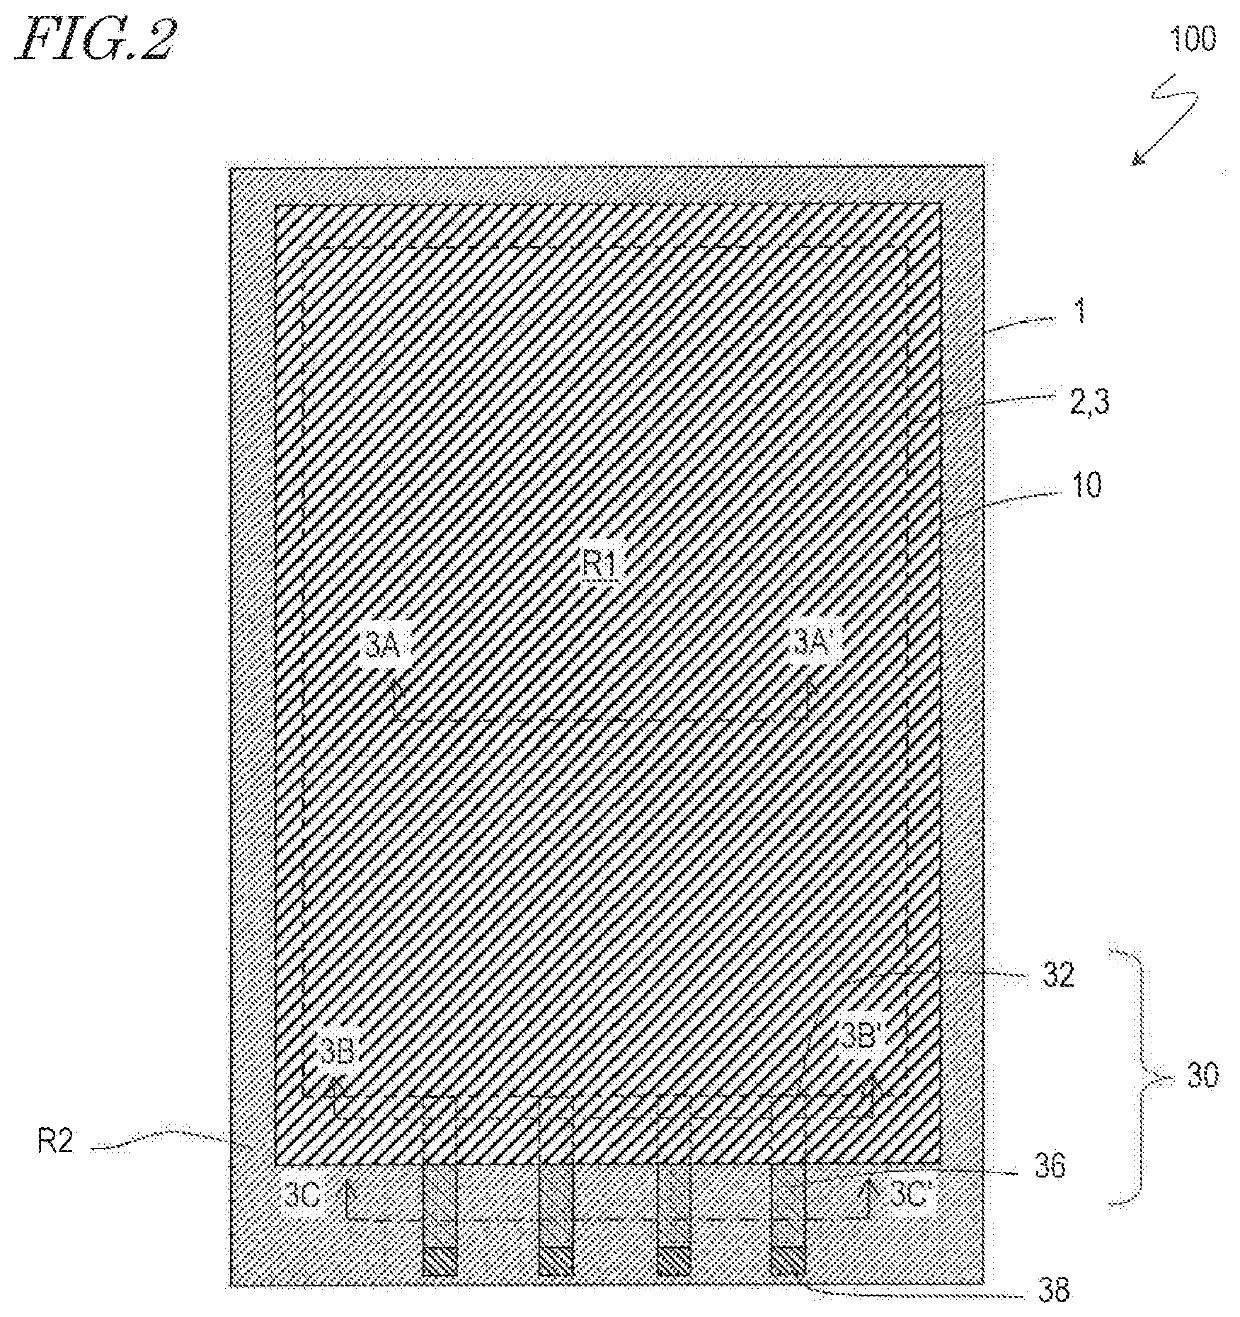 Method for producing organic electroluminescent display device comprising polydiacetylene layers